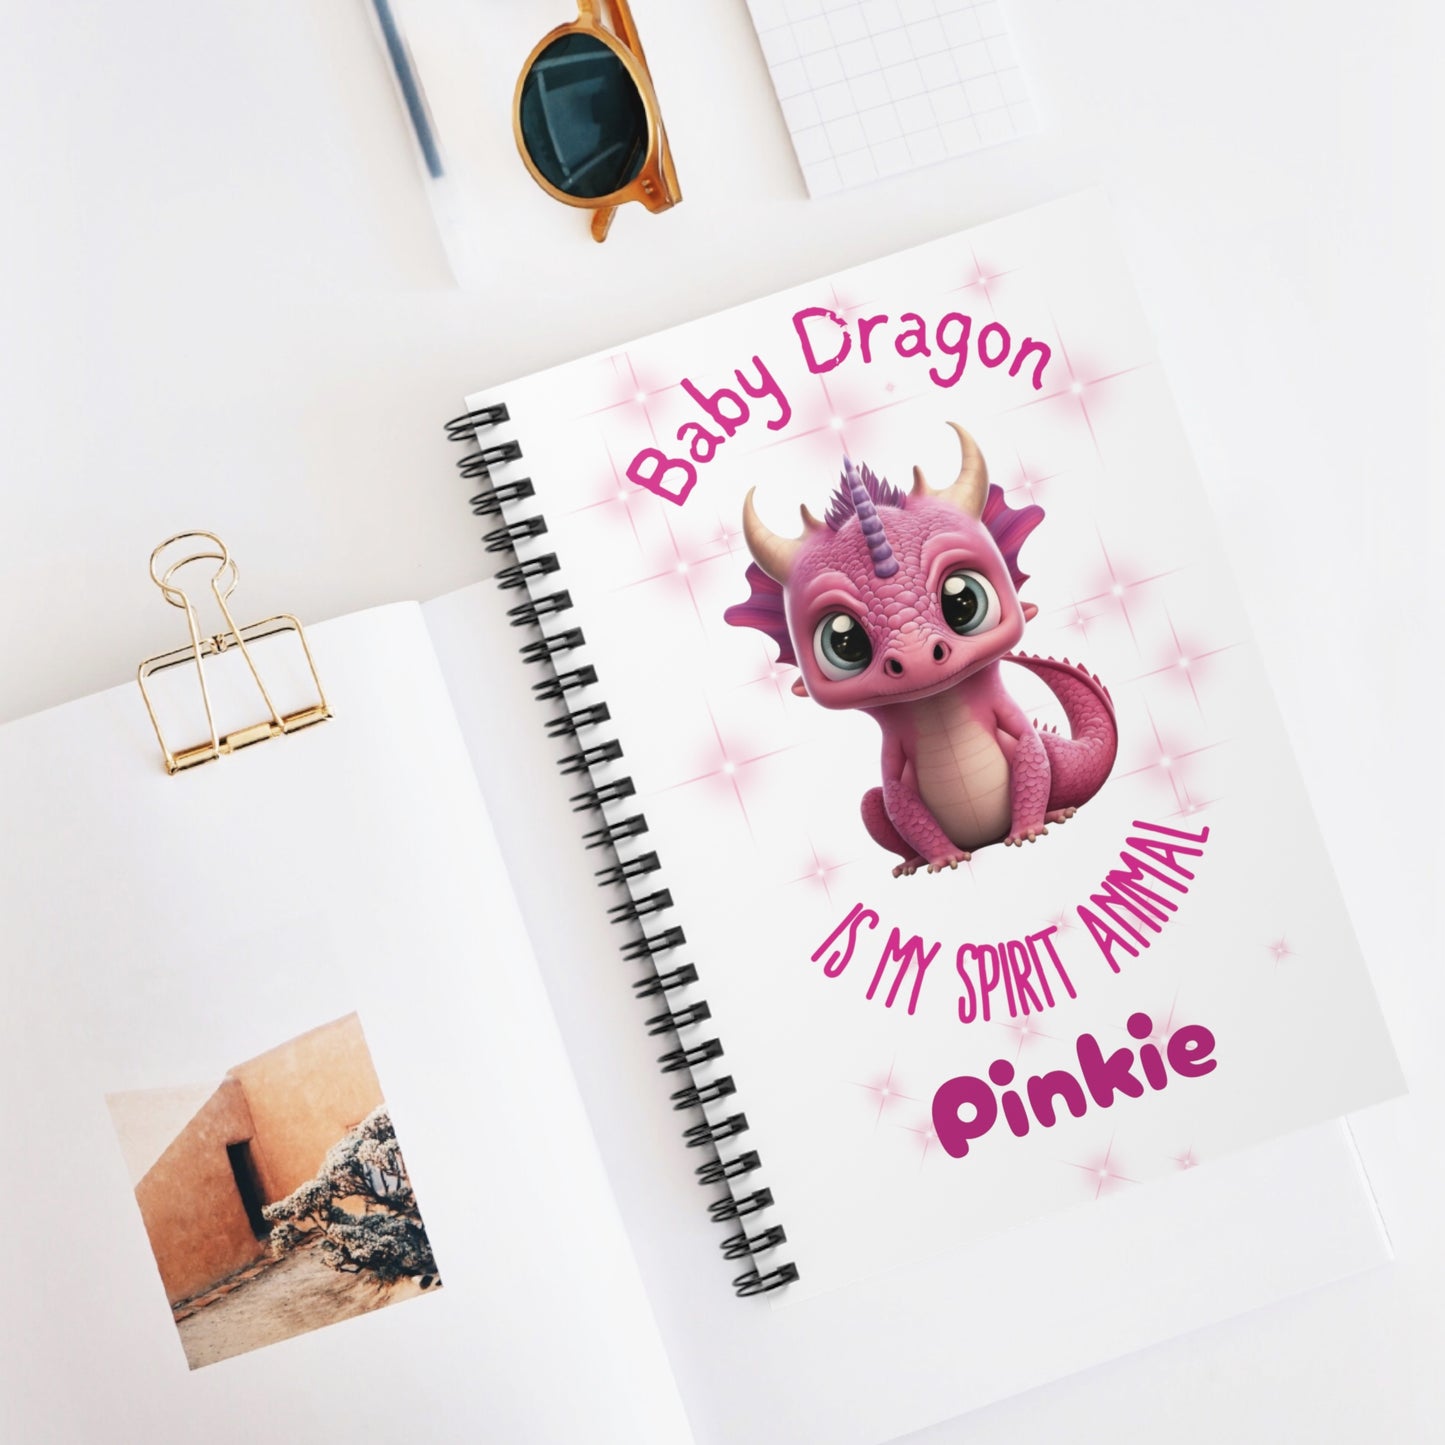 Baby Dragon Pinkie Is My Spirit Animal Spiral Notebook - Ruled Line - Mothers Day